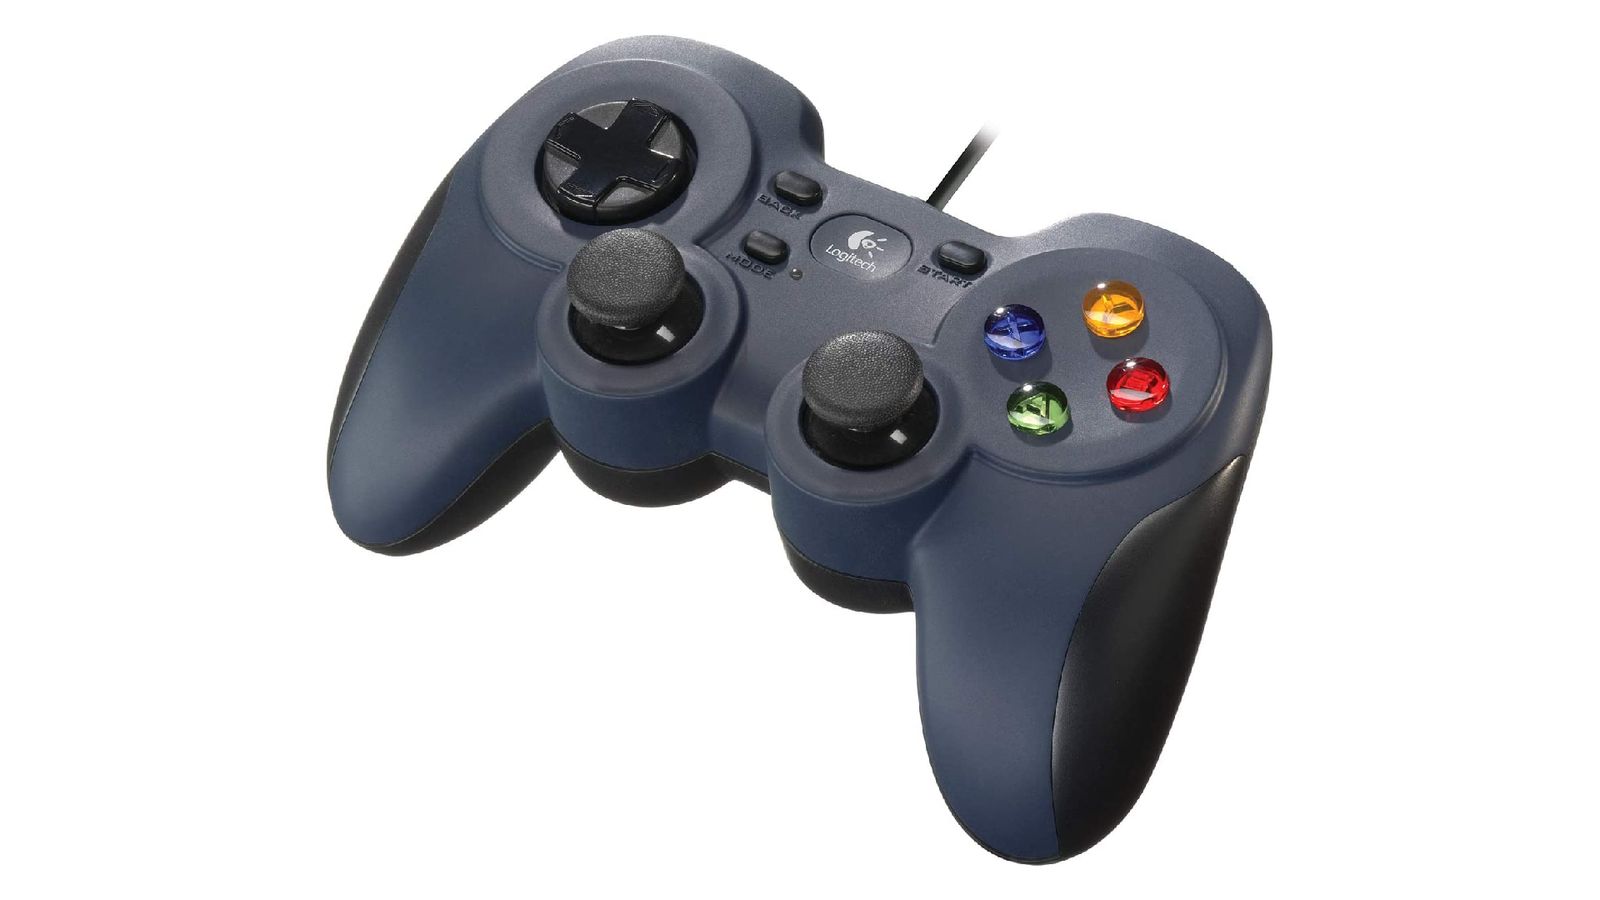 Logitech F310 product image of a small grey and black controller with multicoloured buttons on the right.